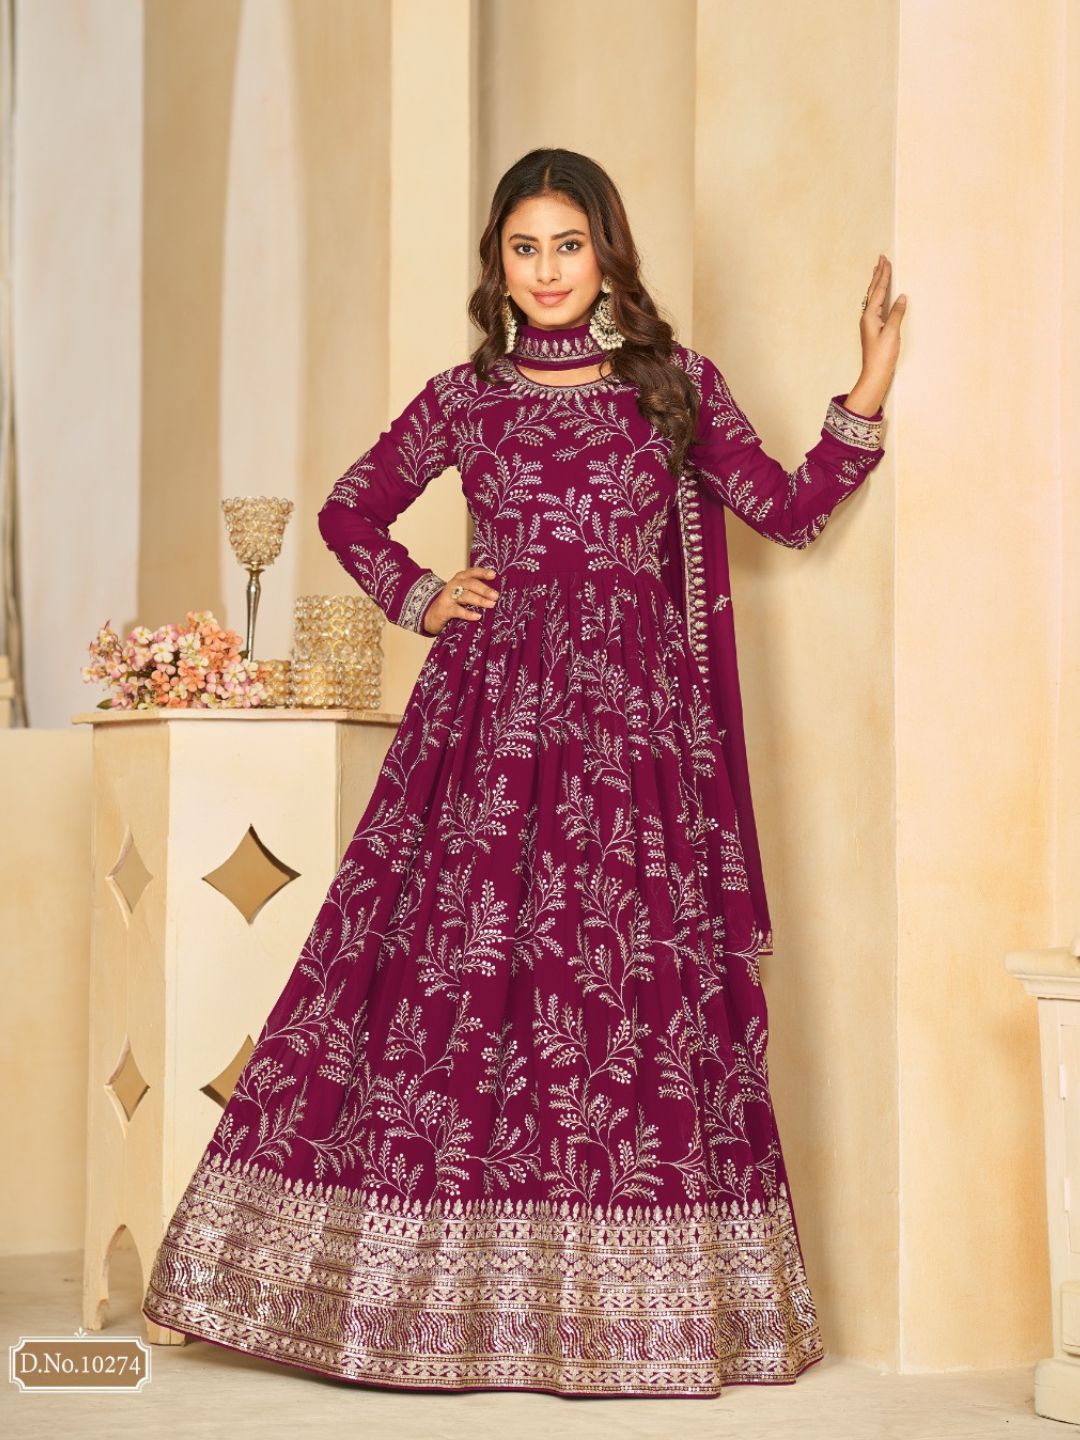 Georgette Embroidered Bollywood Salwar Kameez in Pink with Stone work-81981